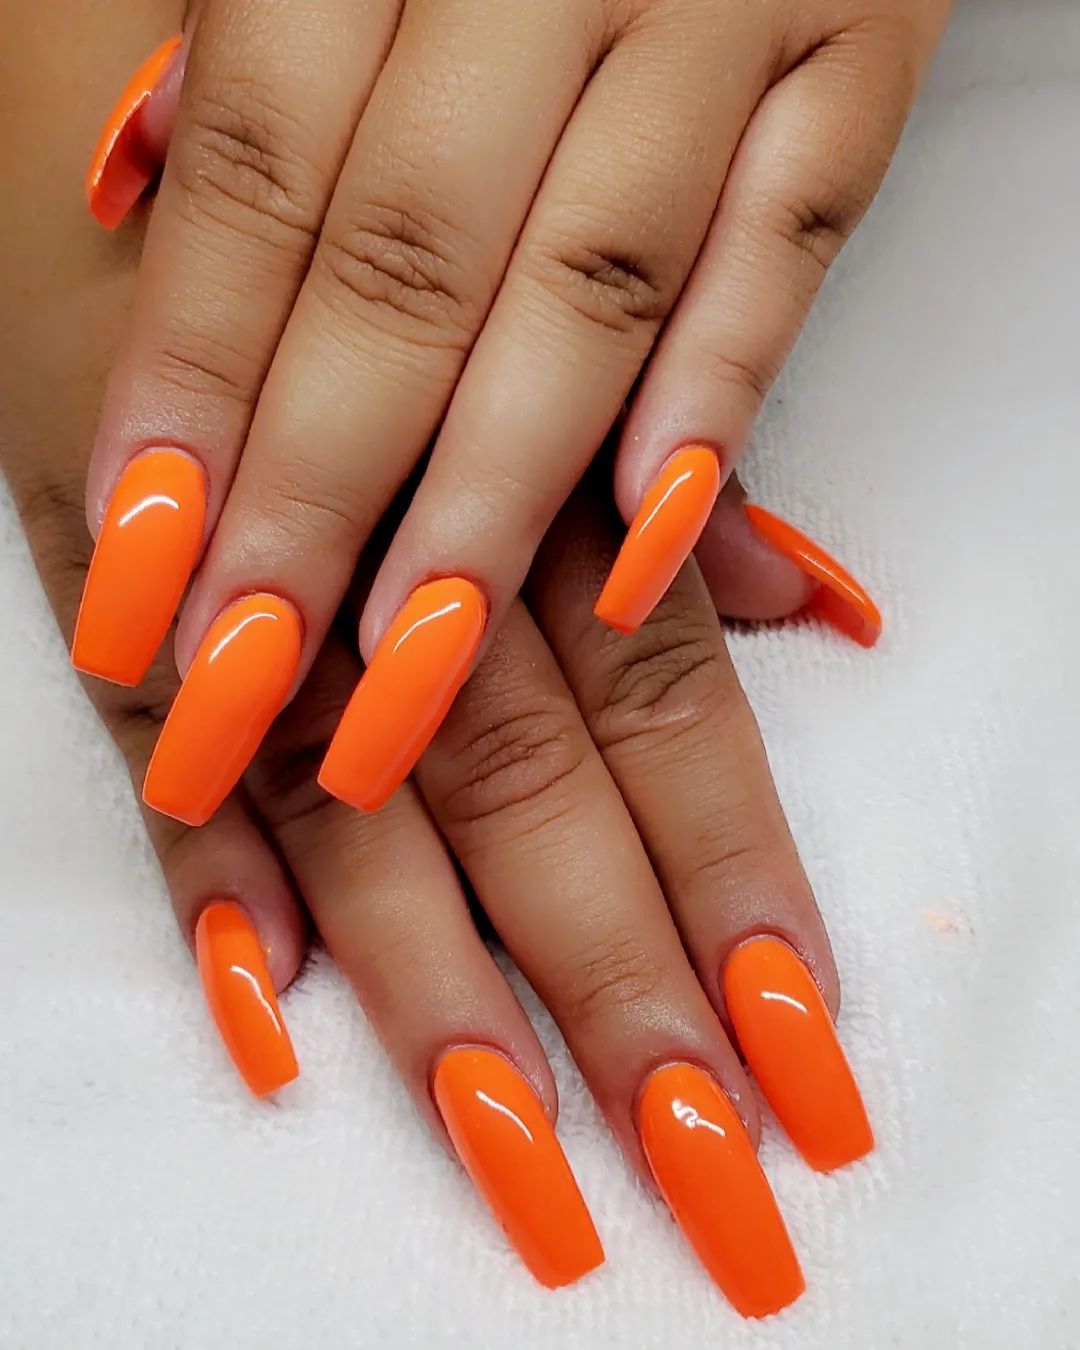 How about applying a light orange nail polish? For those who like to stand out from the crowd should definitely go for it.